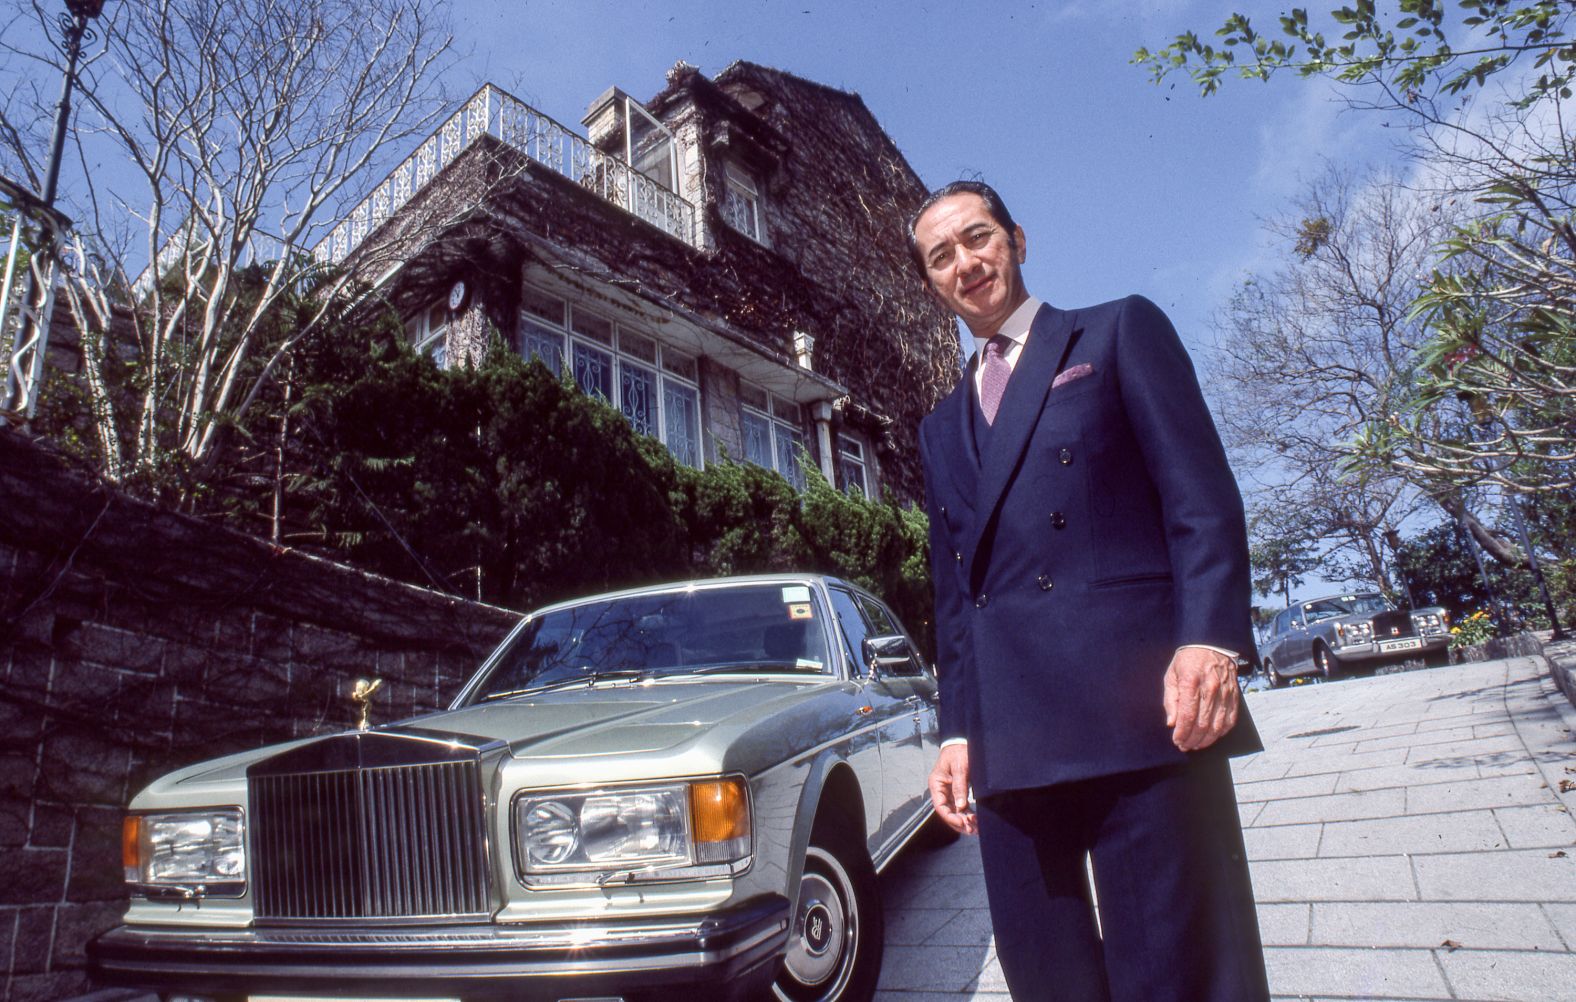 <a href="https://www.cnn.com/2020/05/26/business/stanley-ho-obit-intl-hnk/index.html" target="_blank">Stanley Ho,</a> Macao gambling tycoon and one of Hong Kong's first billionaires, died on May 26, his family said. He was 98.